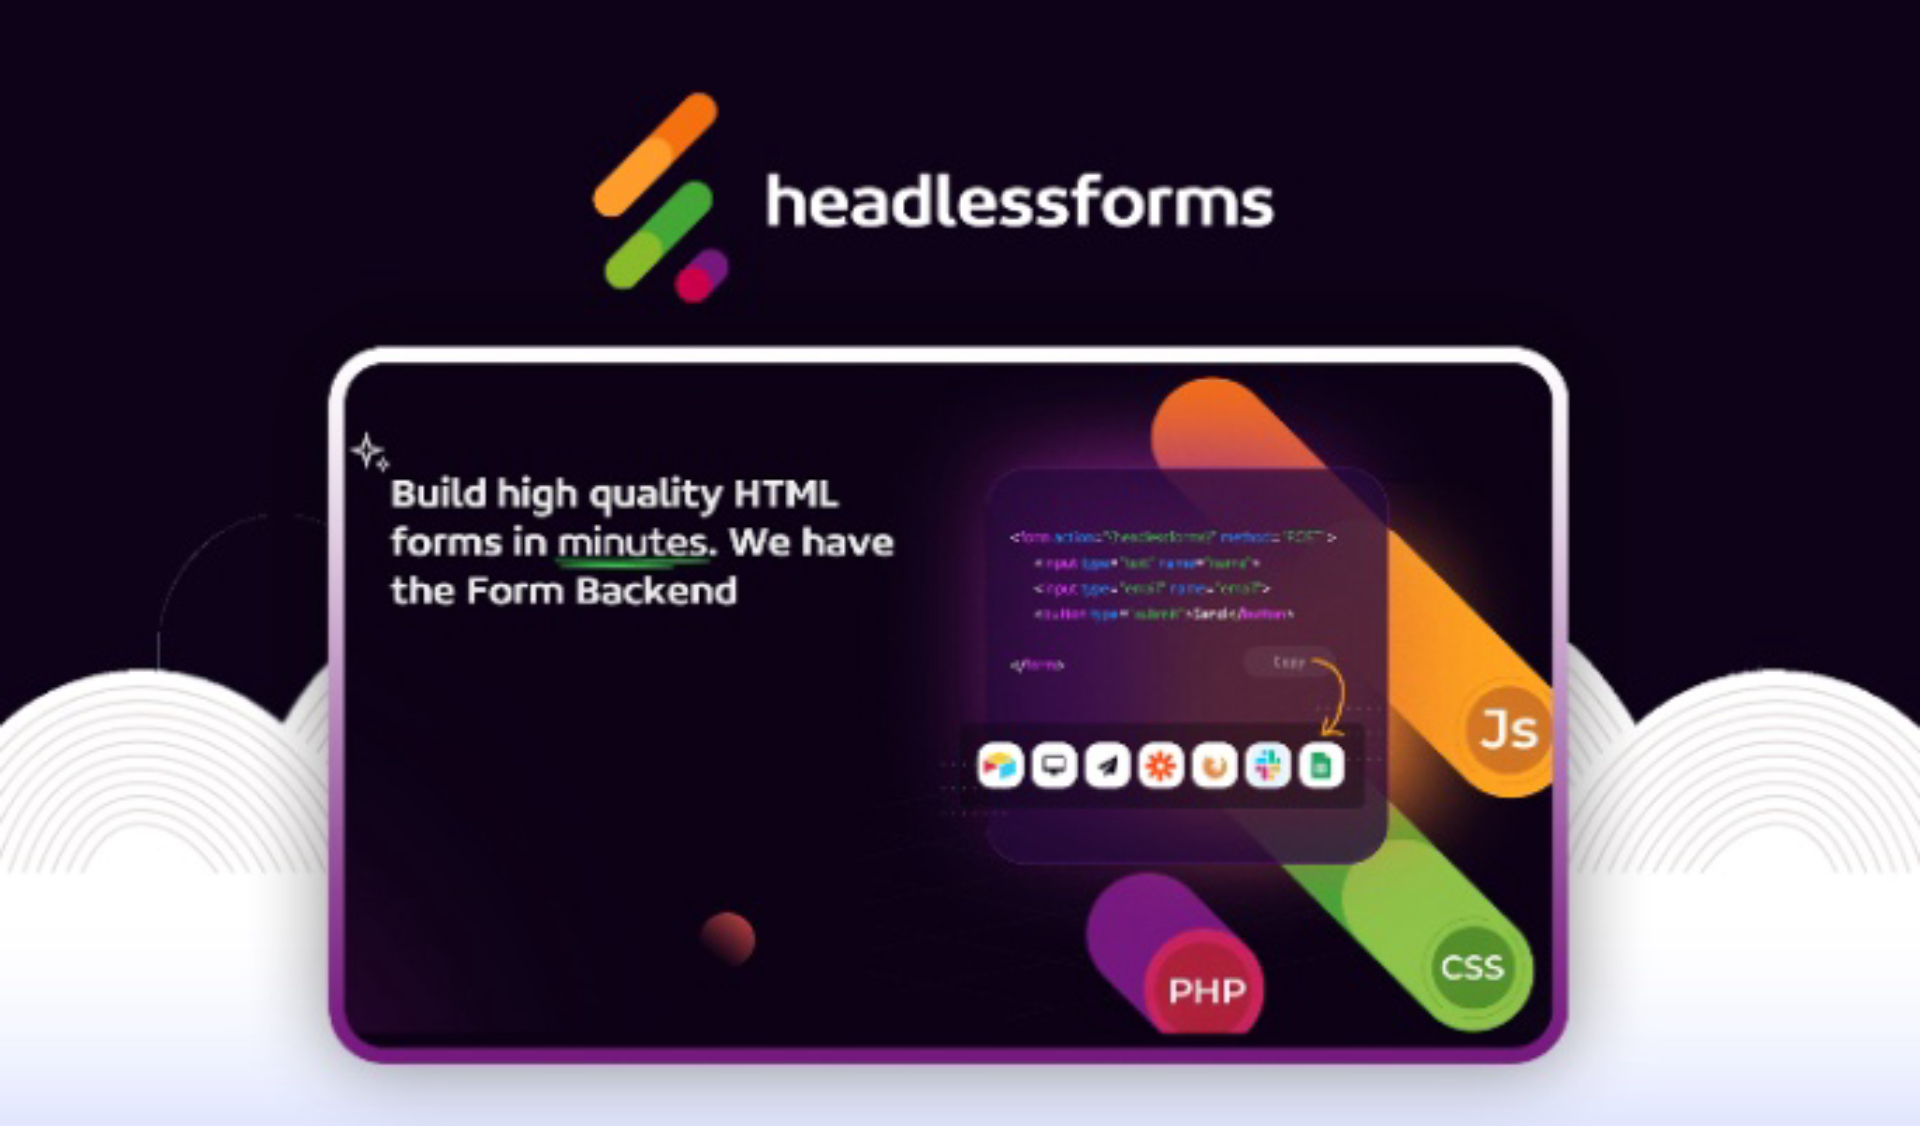 Lifetime Deal to Headlessforms – Form Backend: Small for $39